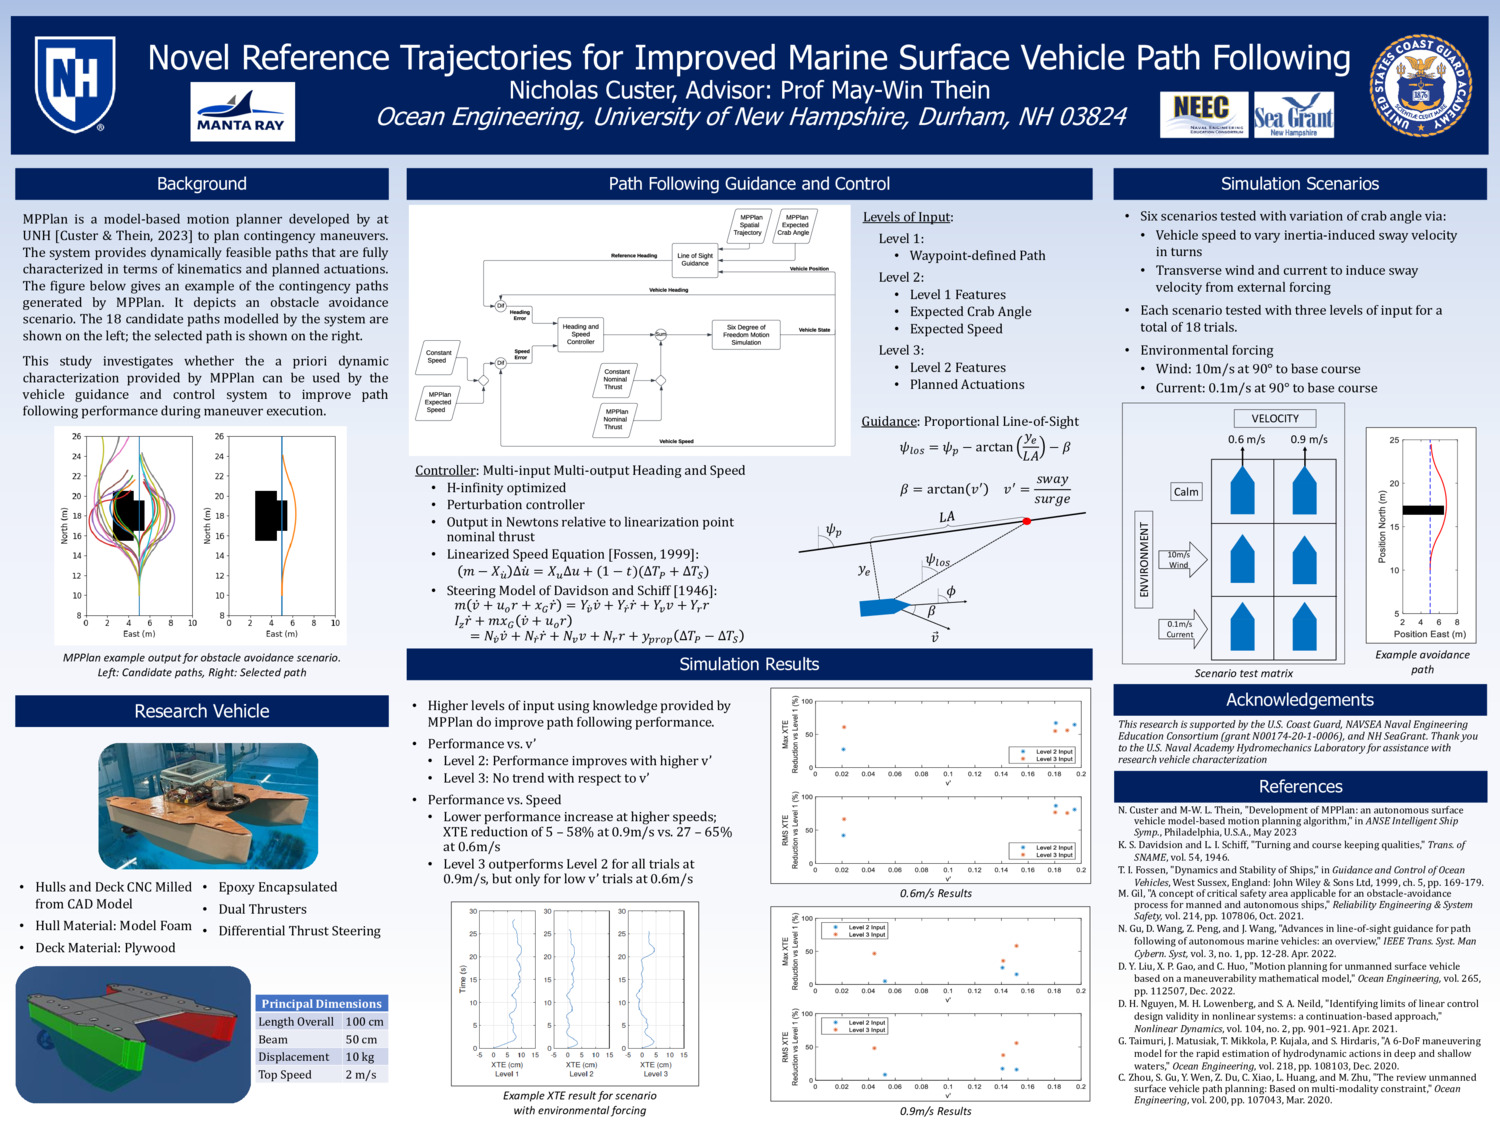 Novel Reference Trajectories For Improved Marine Surface Vehicle Path Following by nccuster